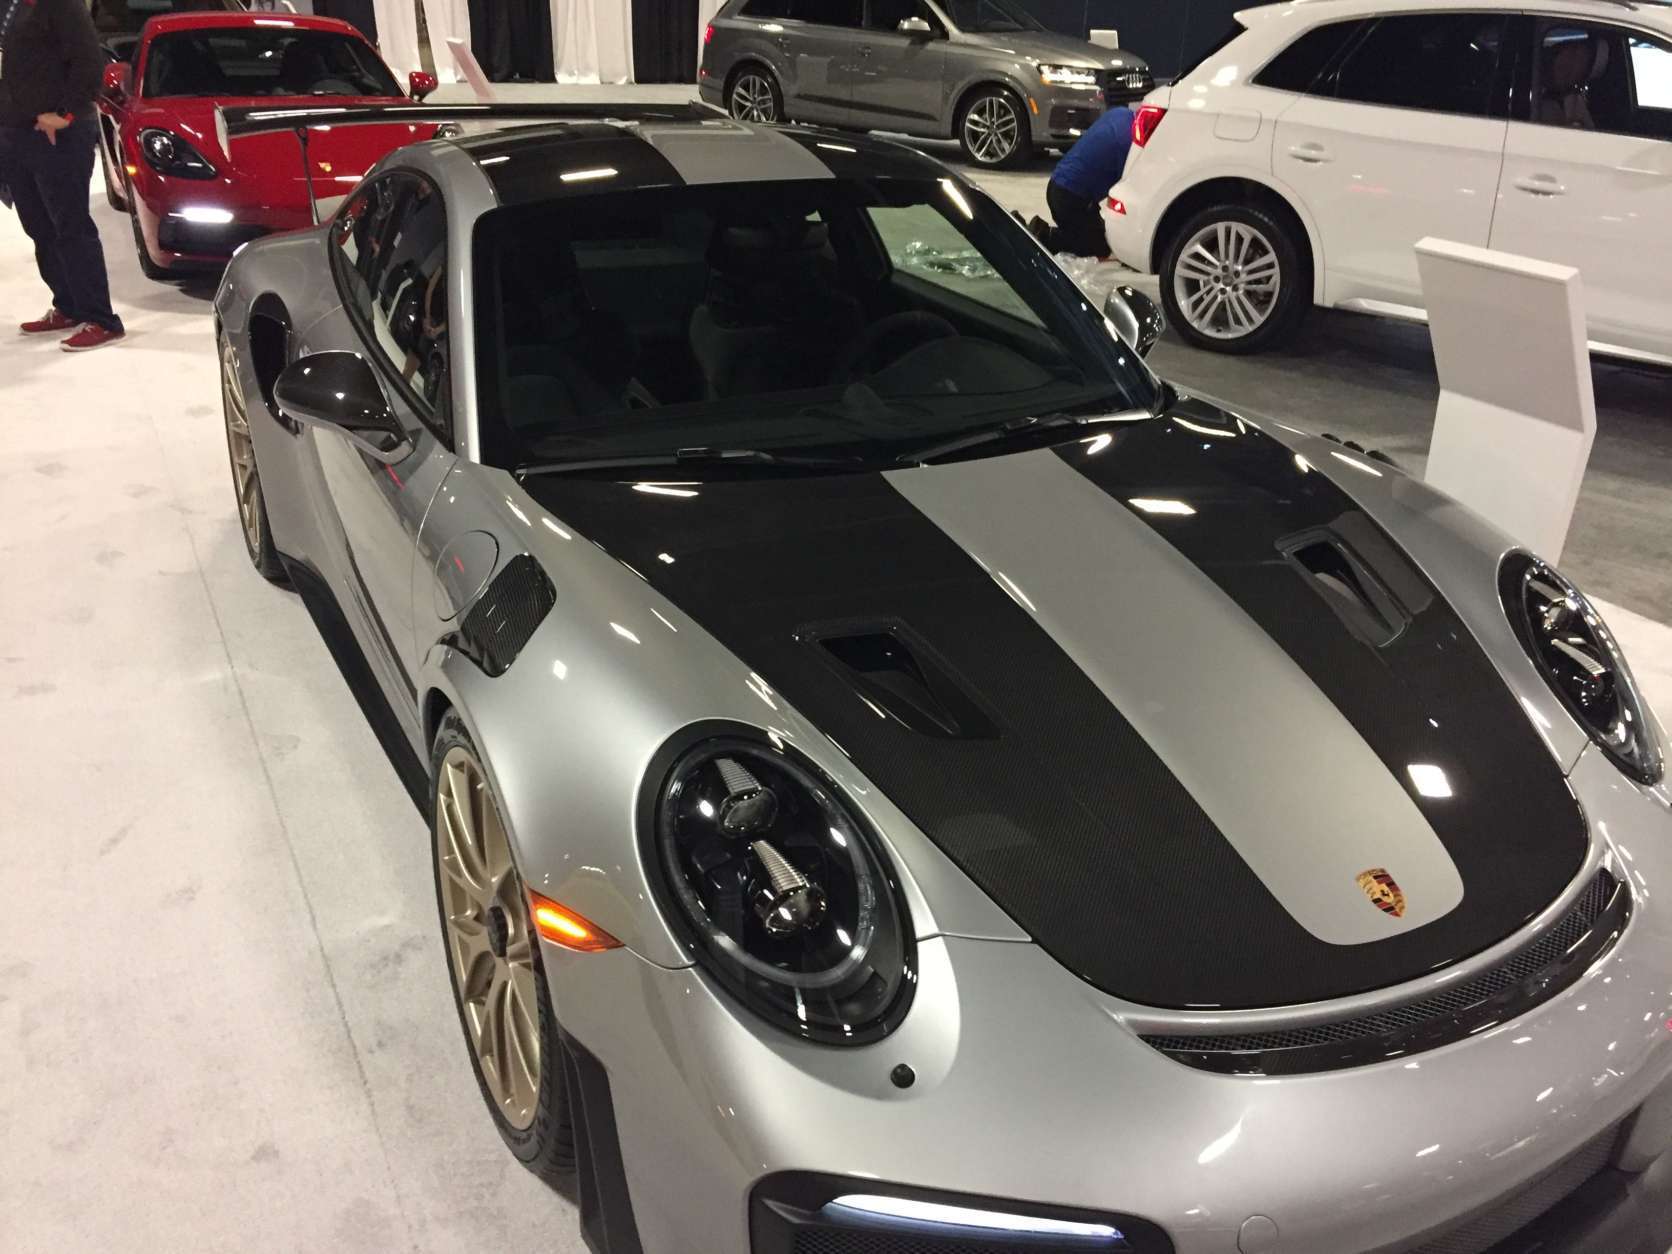 The $344,000 Porsche gt2rs goes 0 to 60 in less than two seconds. Pictured at the 2018 Washington Auto Show.
 (WTOP/John Domen)